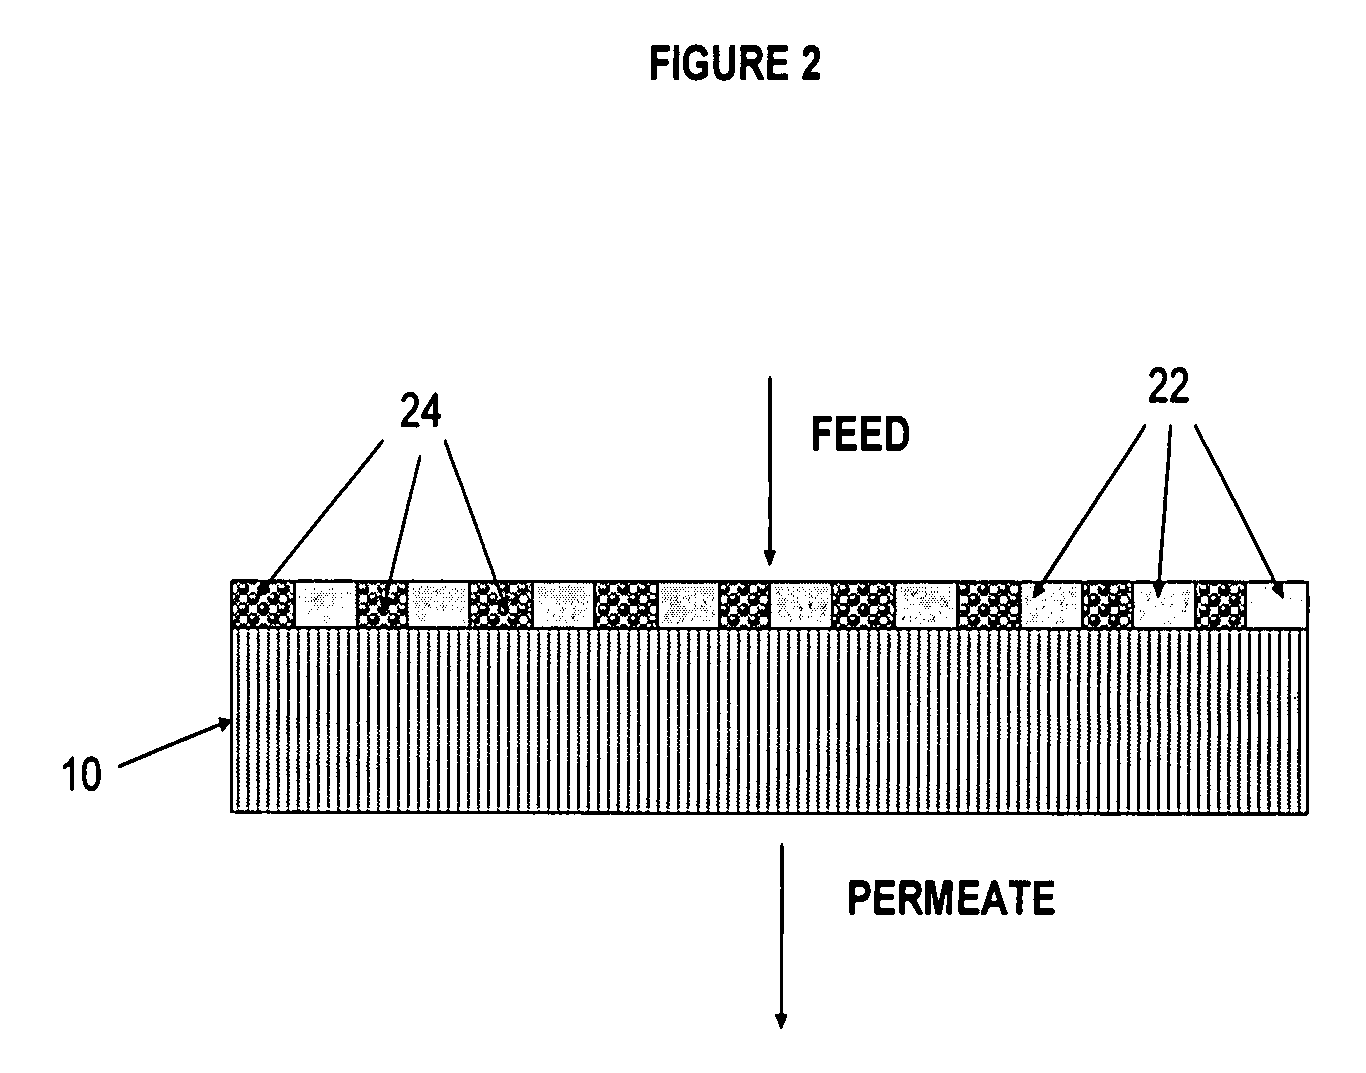 Polymer membrane for separating aromatic and aliphatic compounds